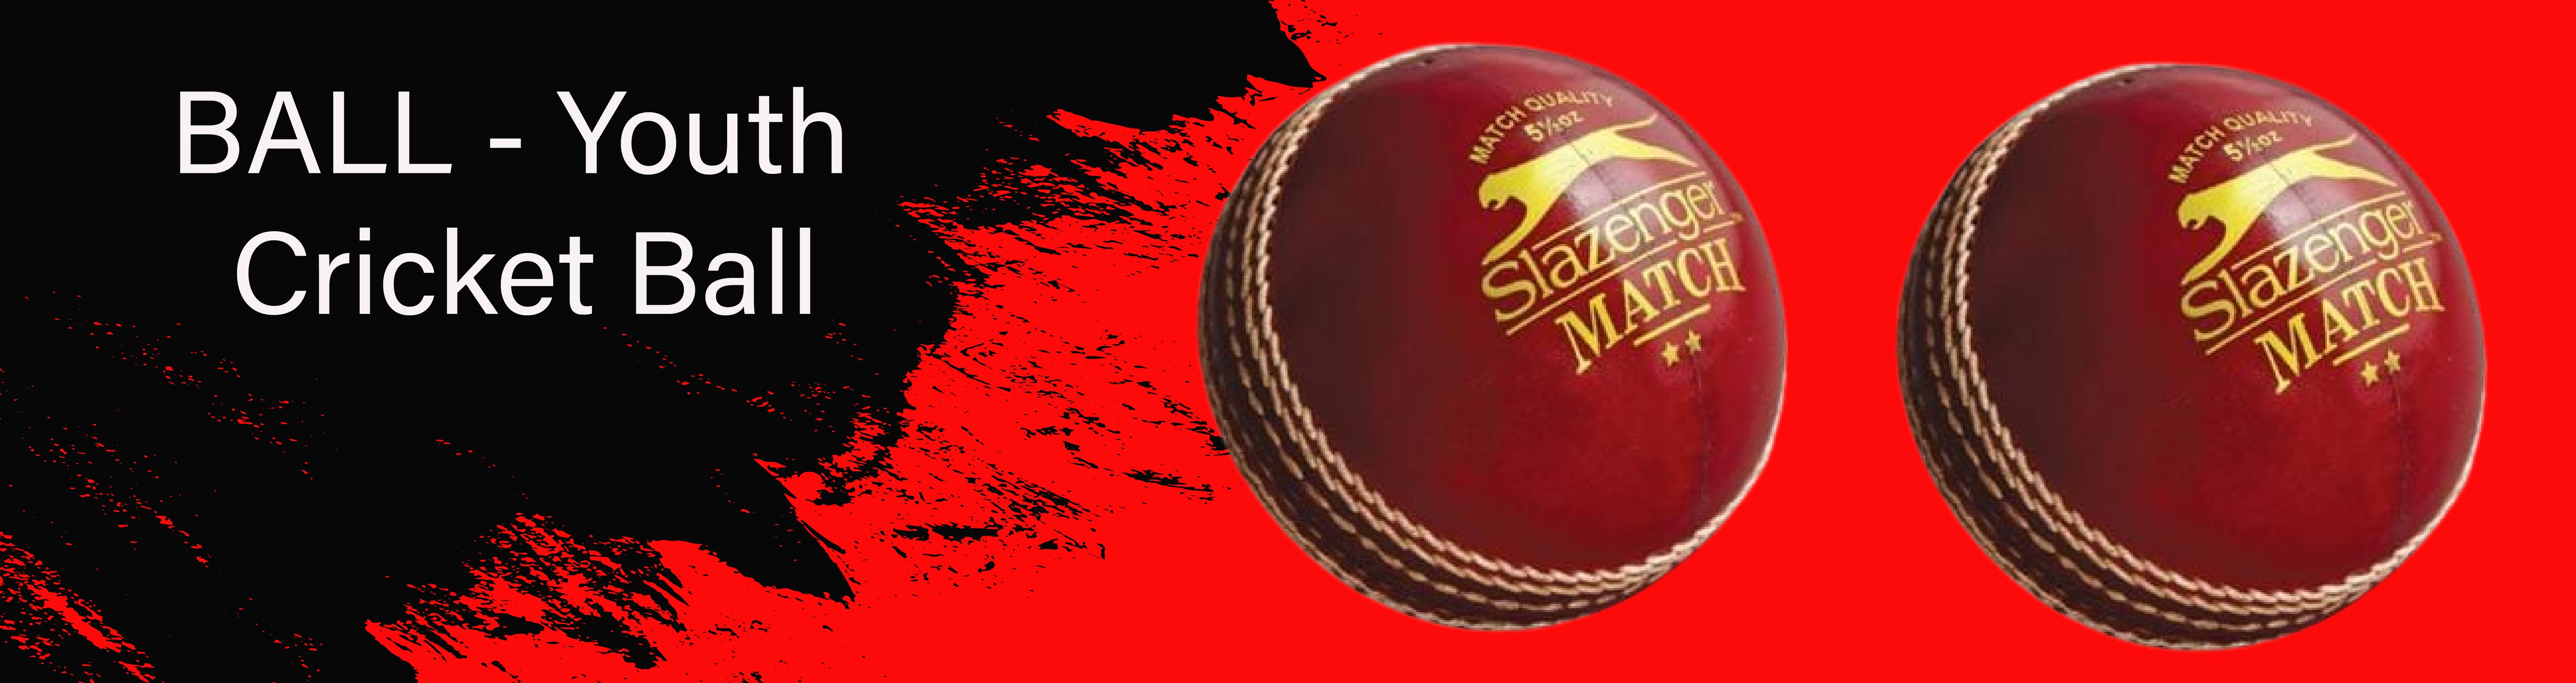 Collection Image BALL - Youth Cricket Ball